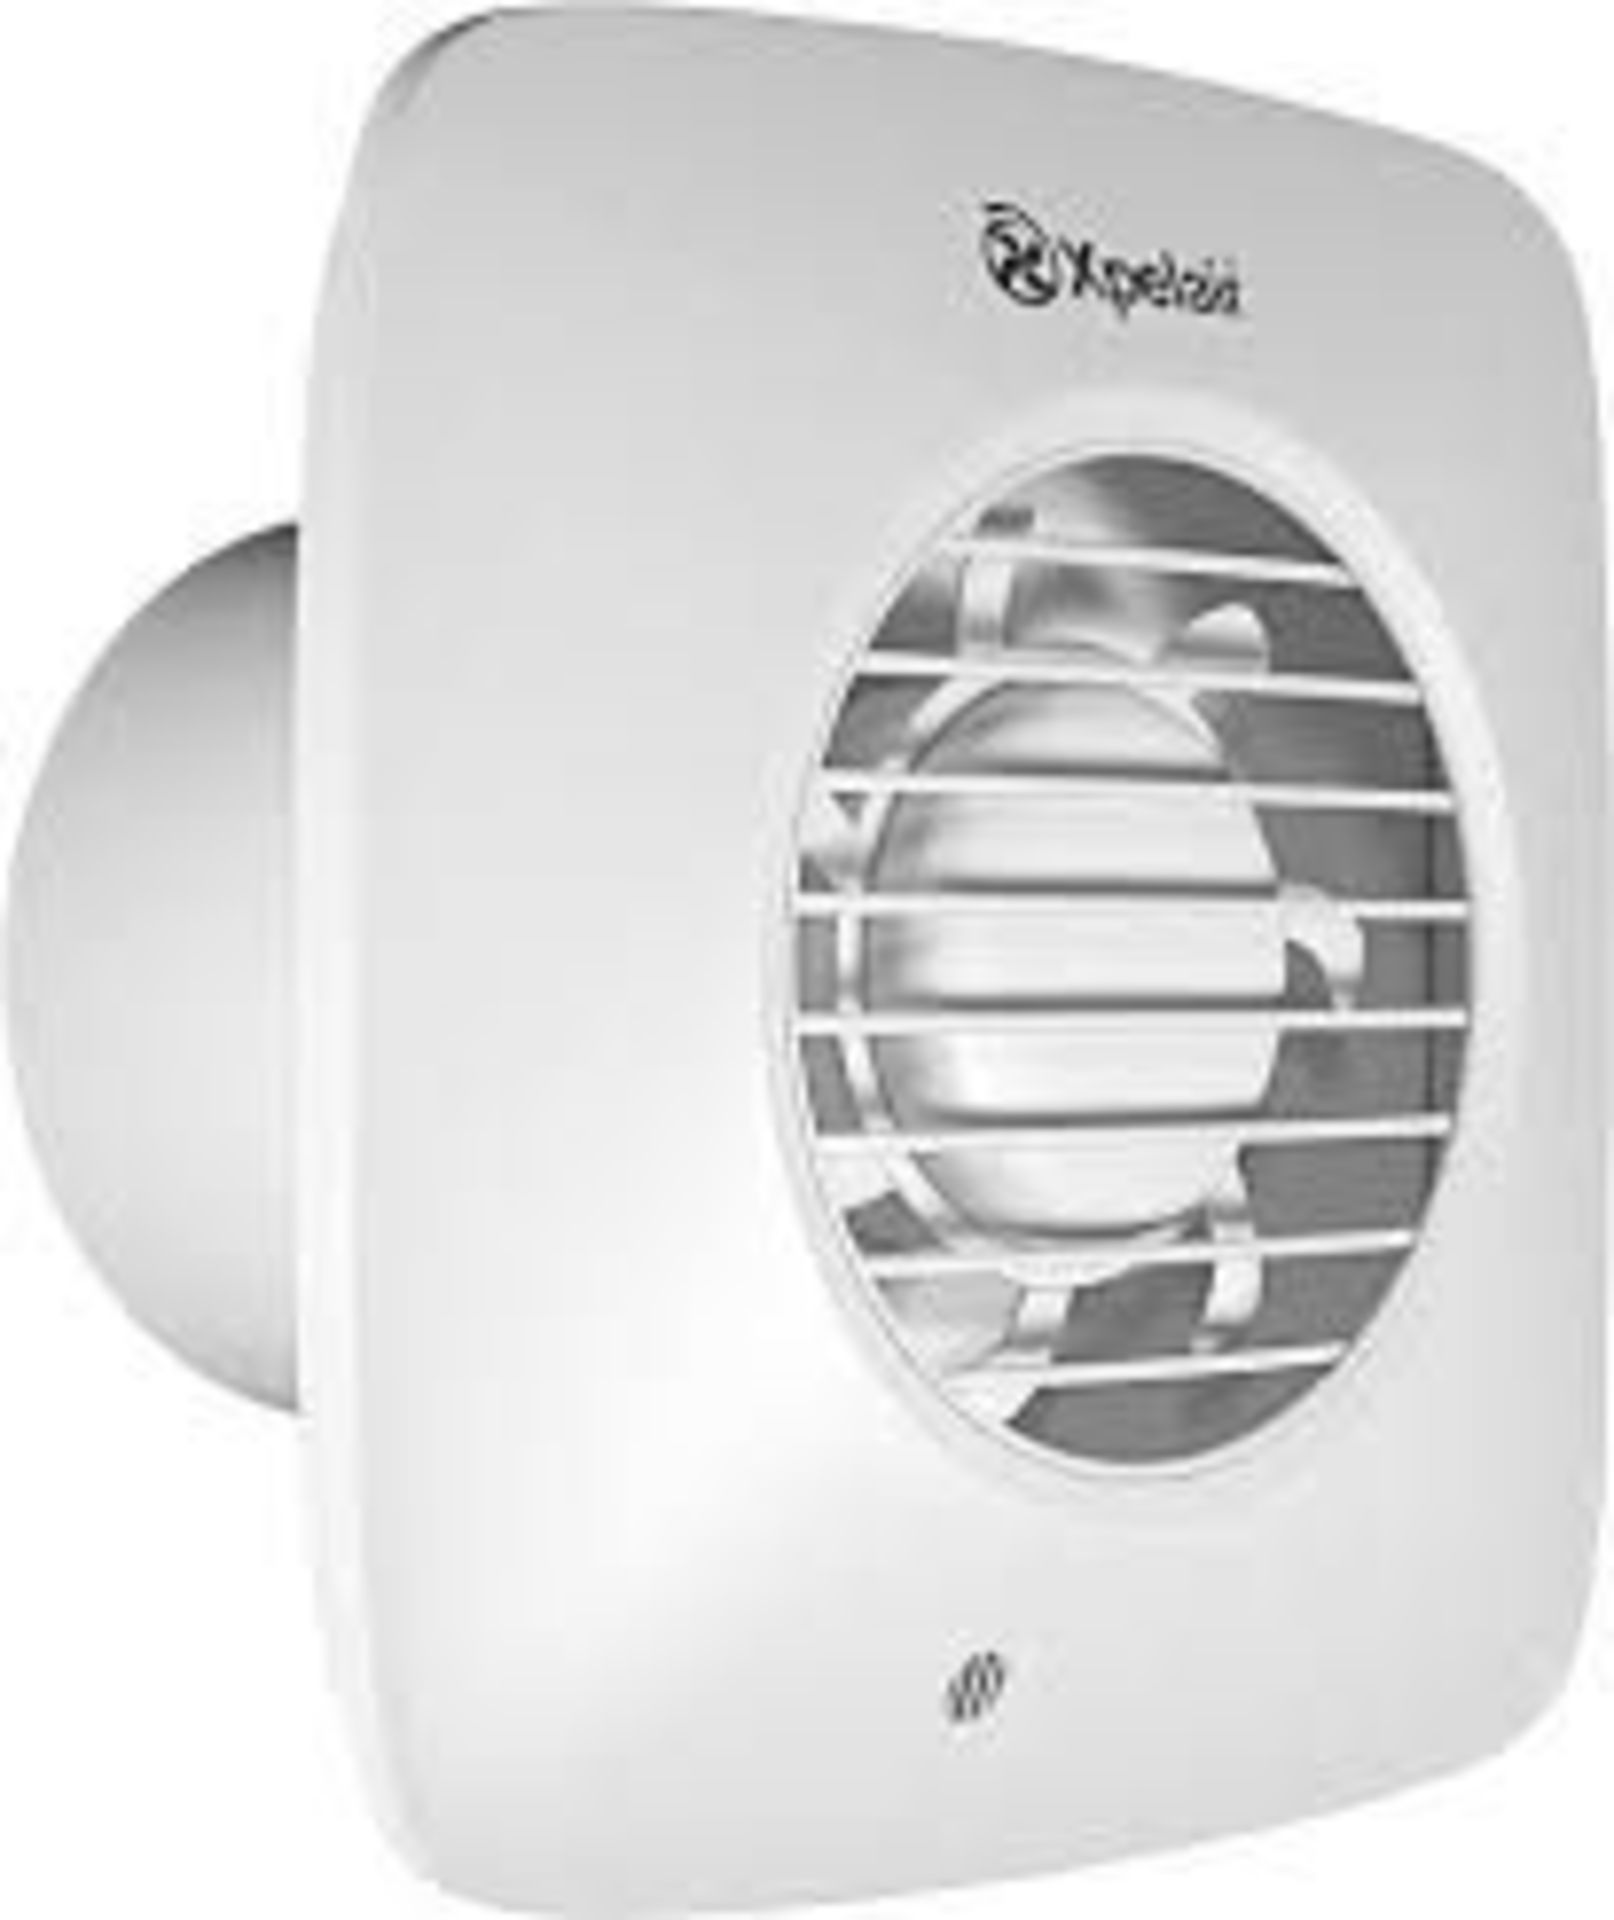 Xpelair DX100PS 4 inch (100mm) Simply Silent DX100 Bathroom Fan. - R14.14.